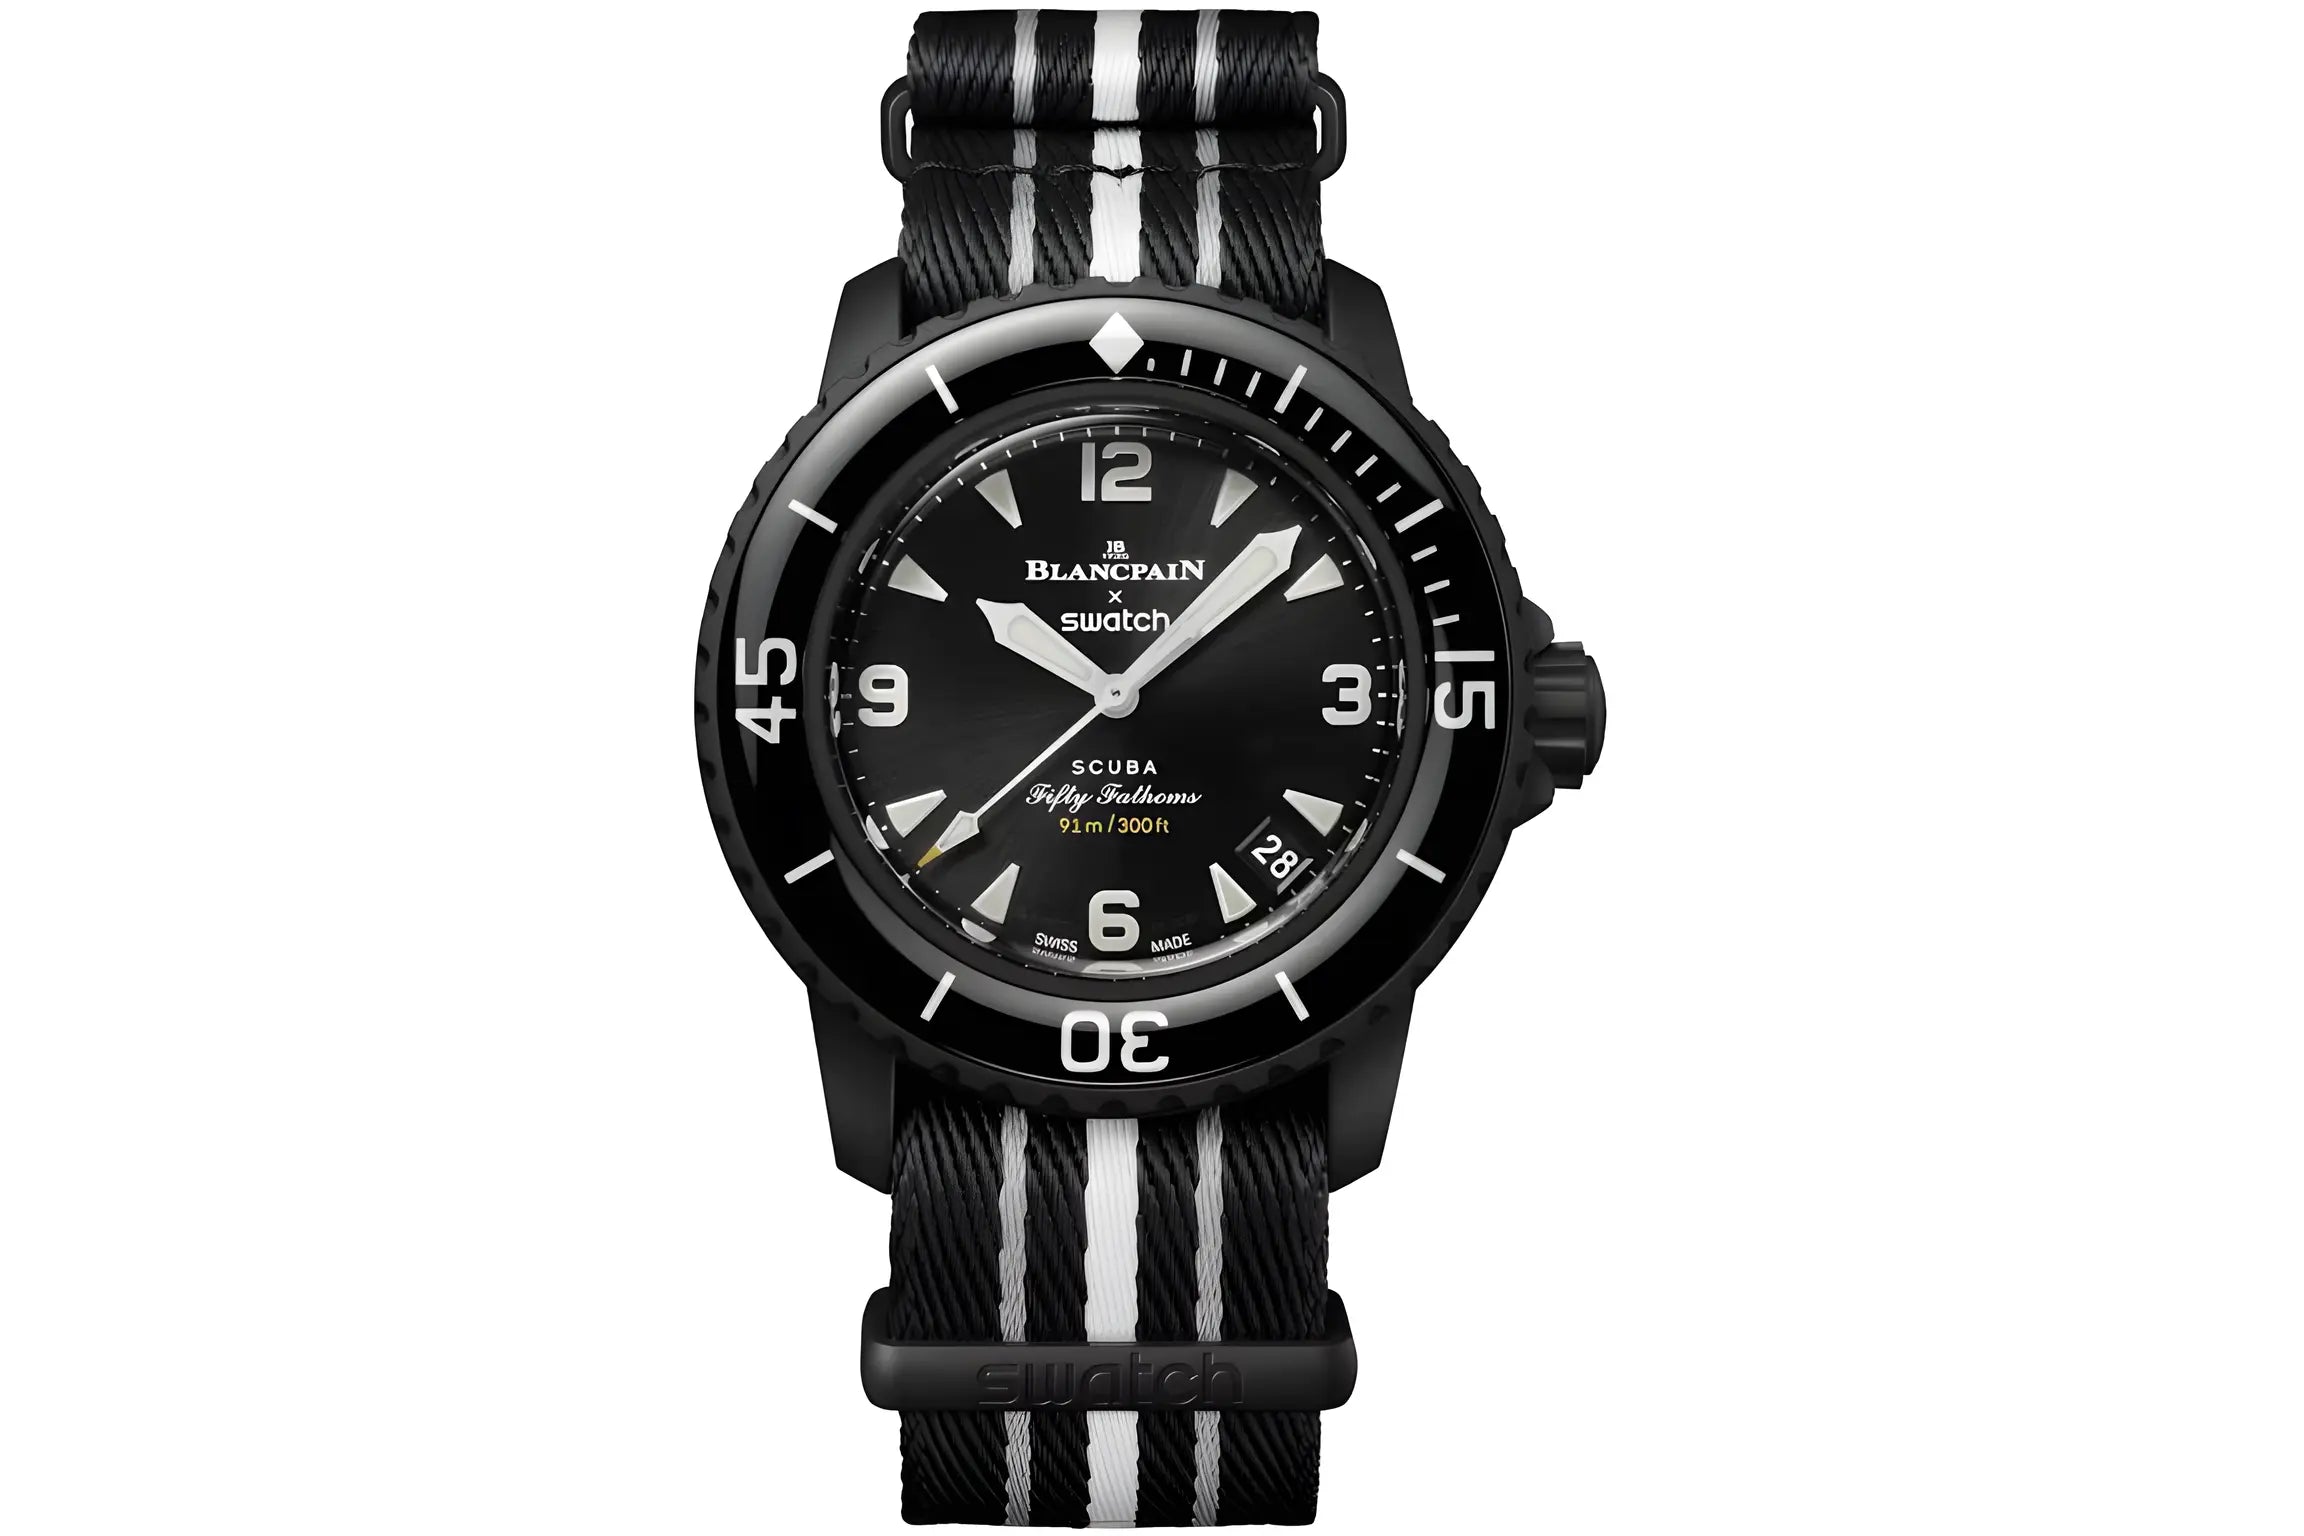 Blancpain x Swatch Scuba Fifty Fathoms Ocean of Storms Next Step